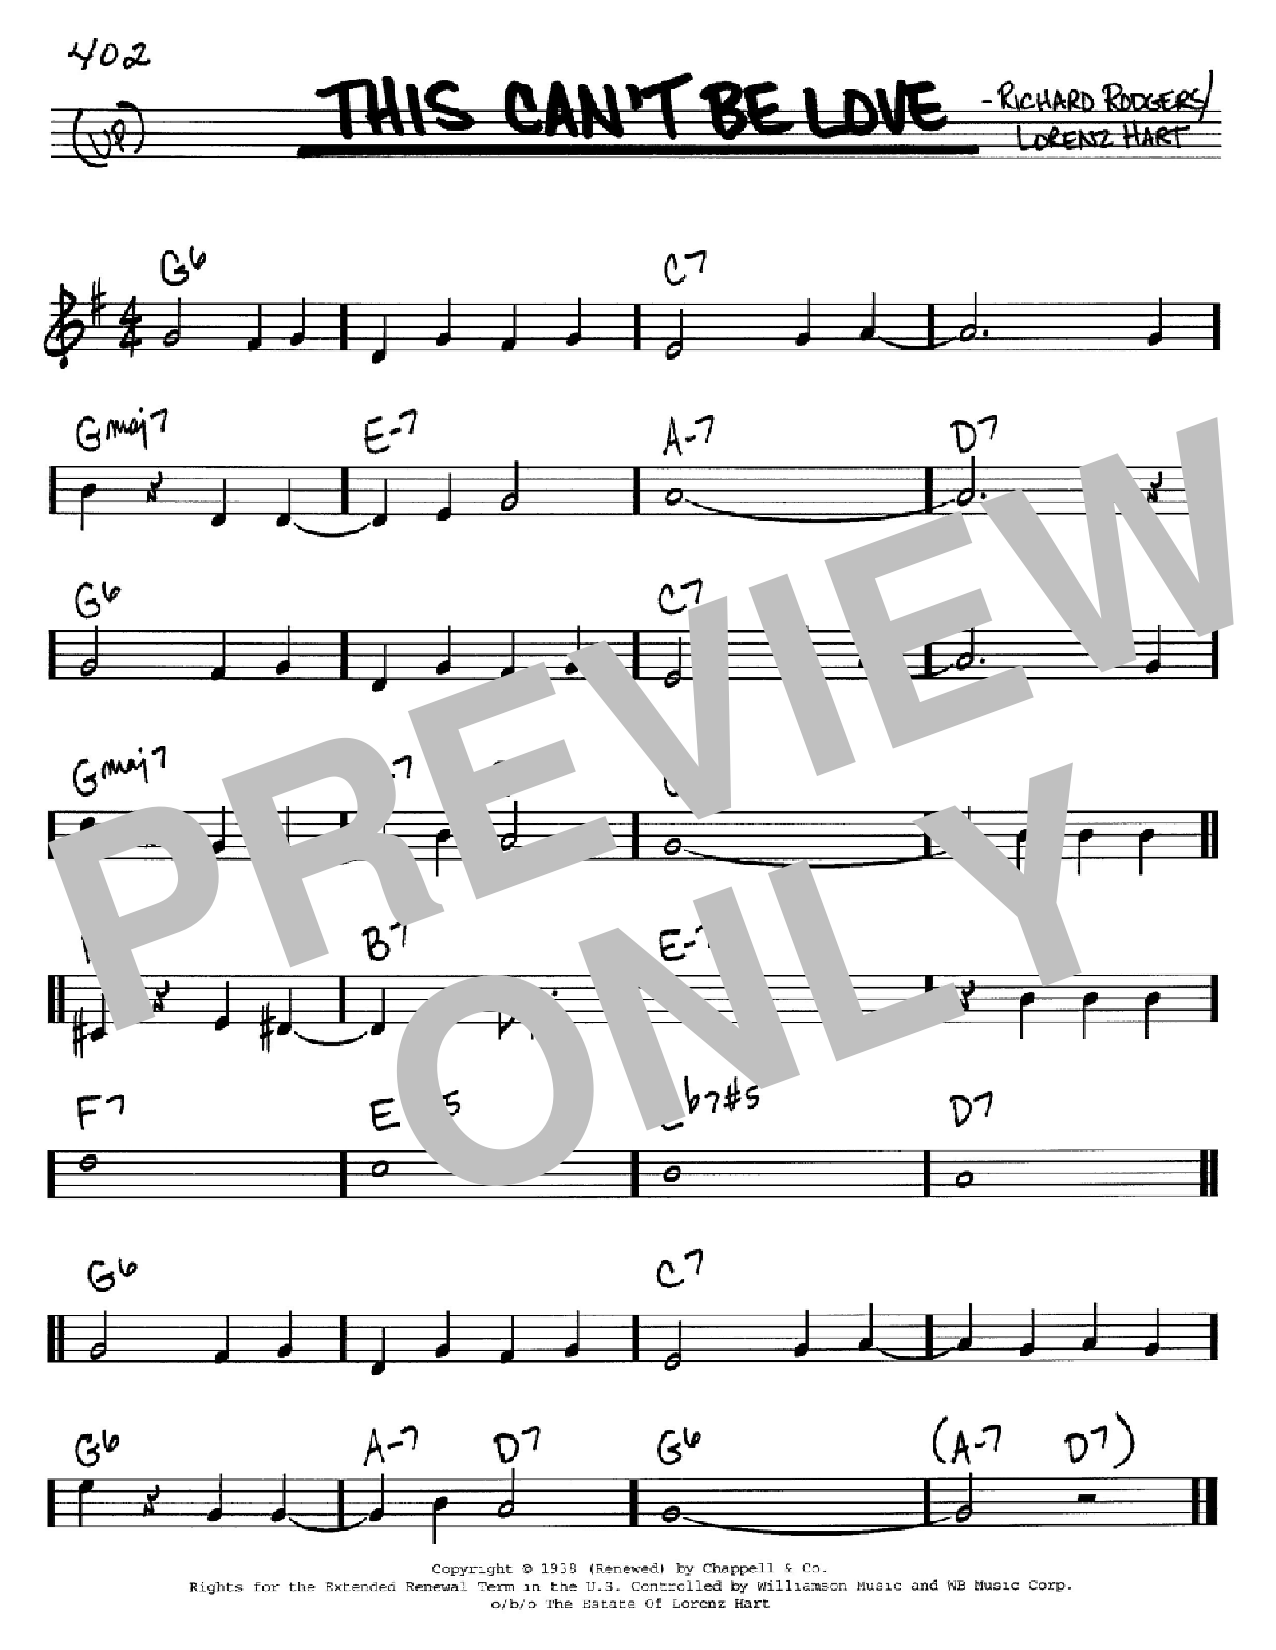 Download Rodgers & Hart This Can't Be Love Sheet Music